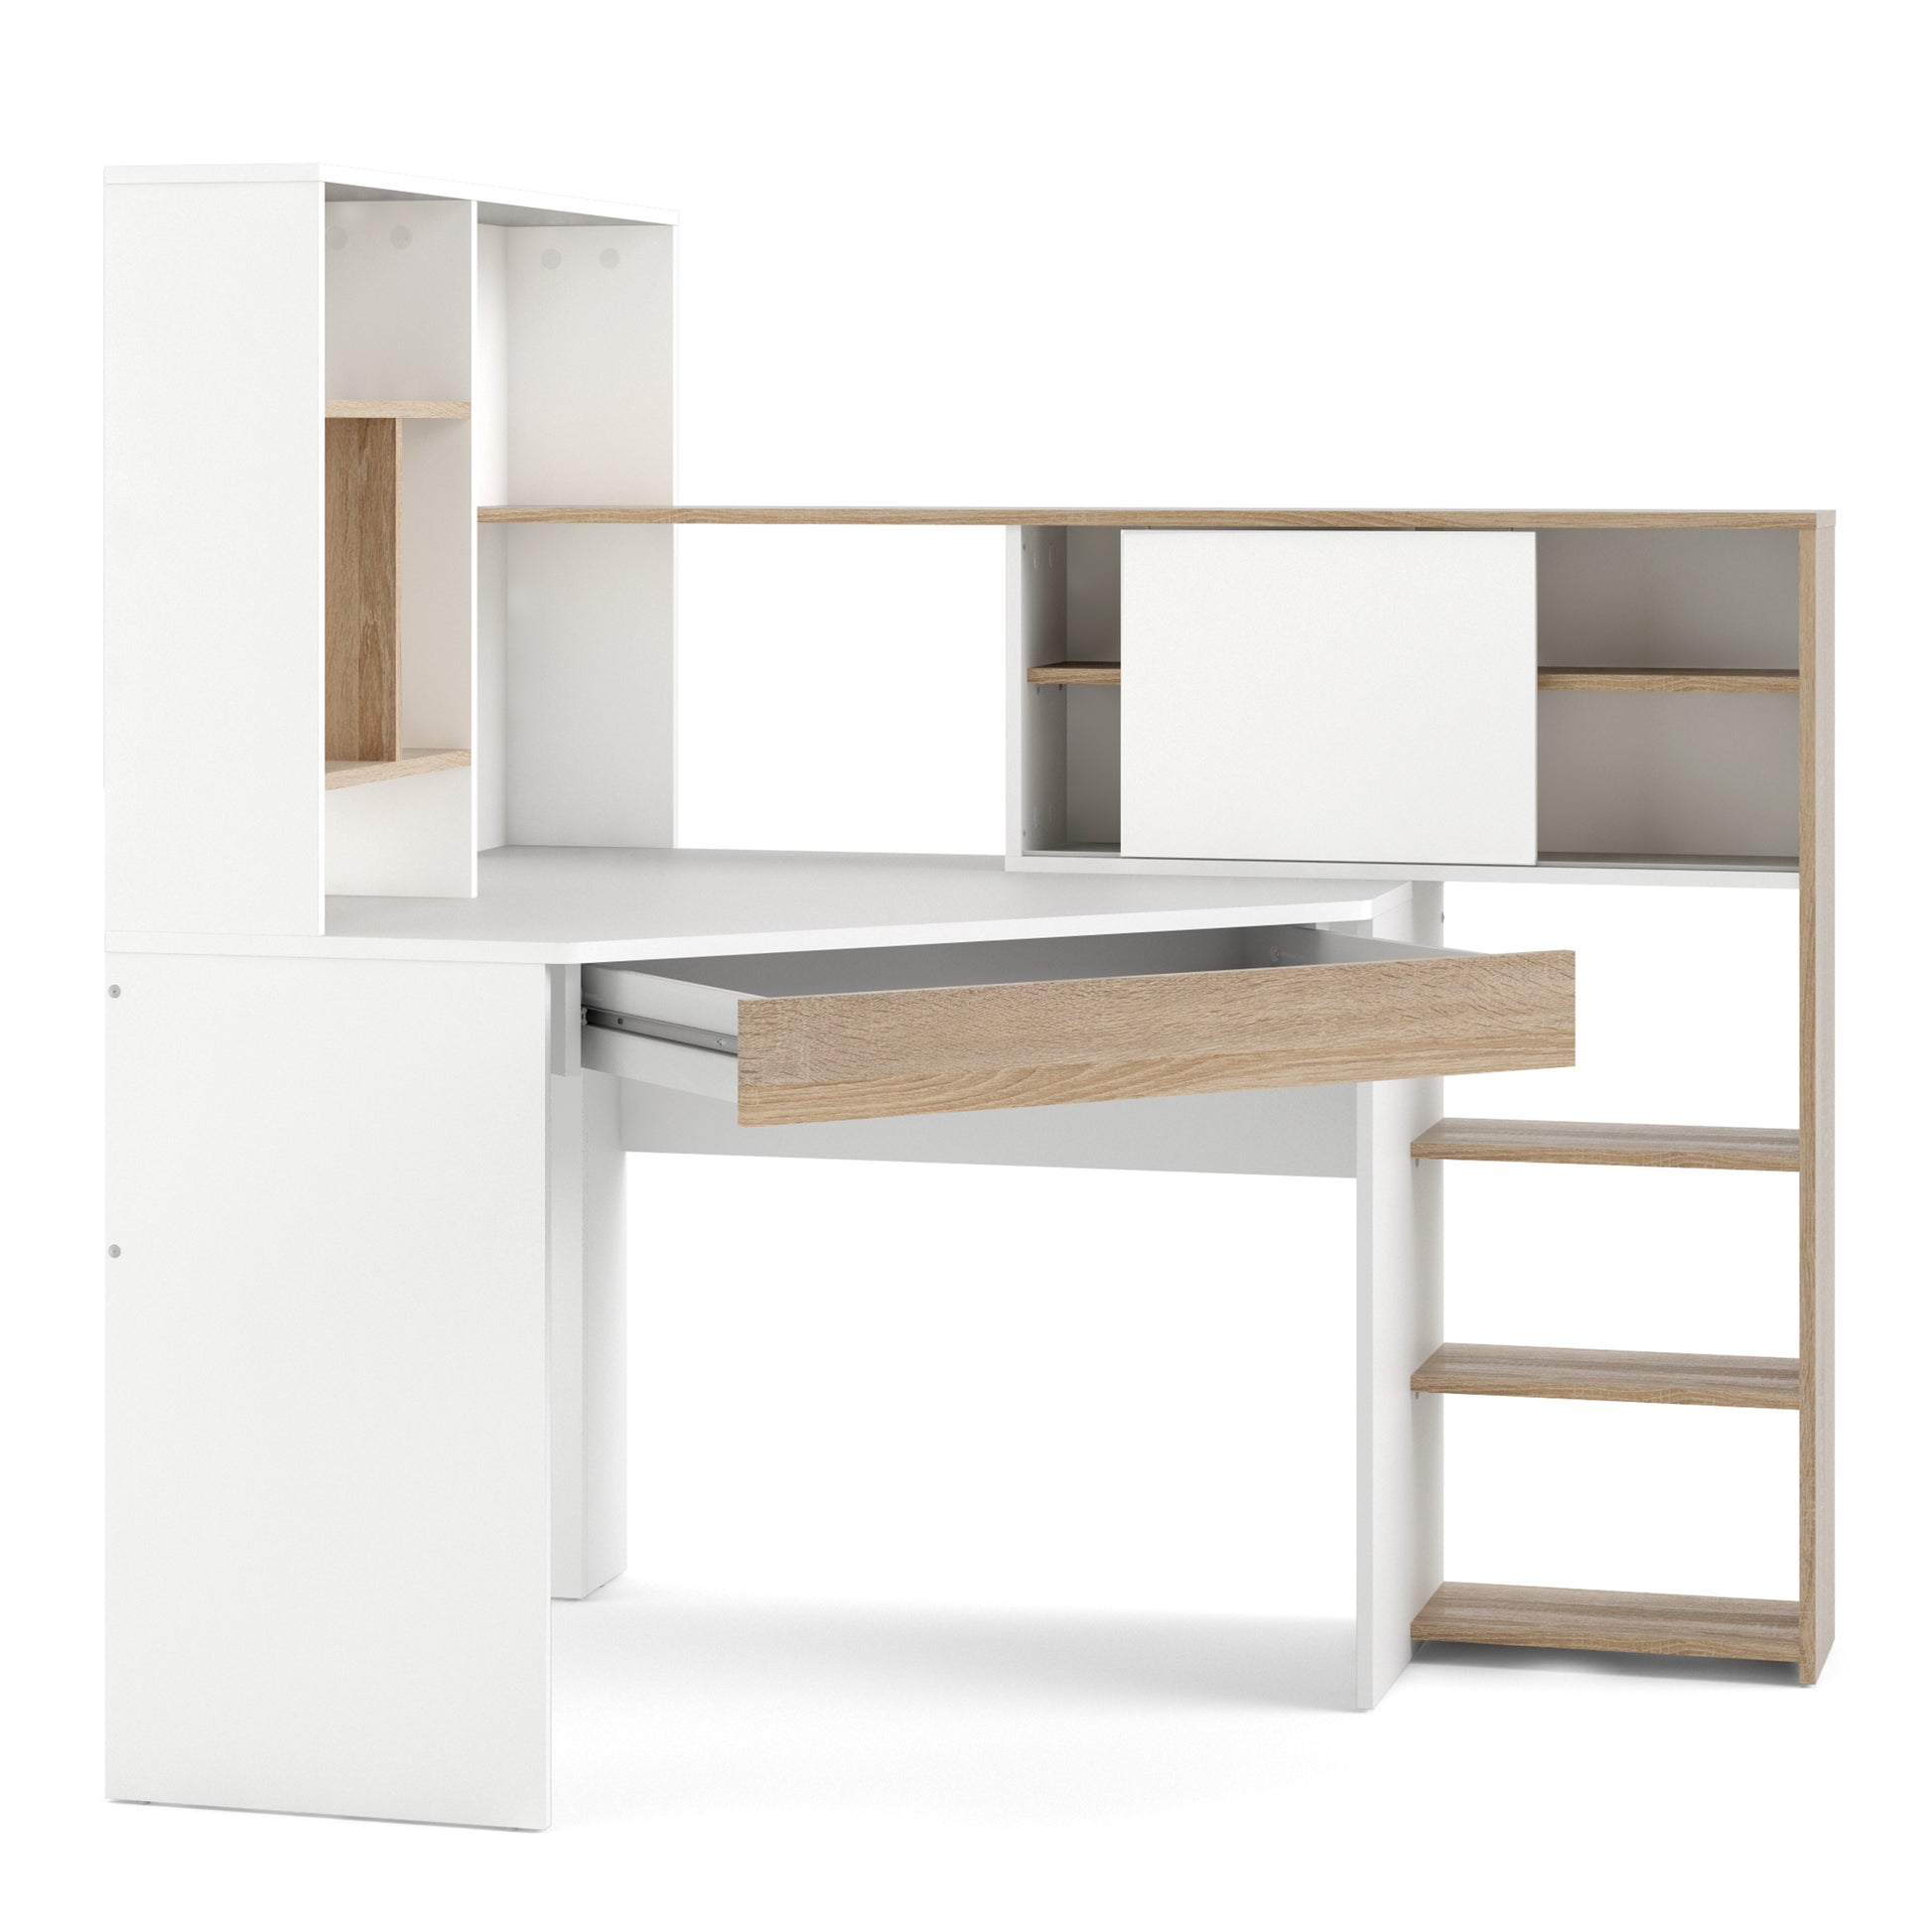 Function Plus  Corner Desk with multi-functional unit In White and Oak